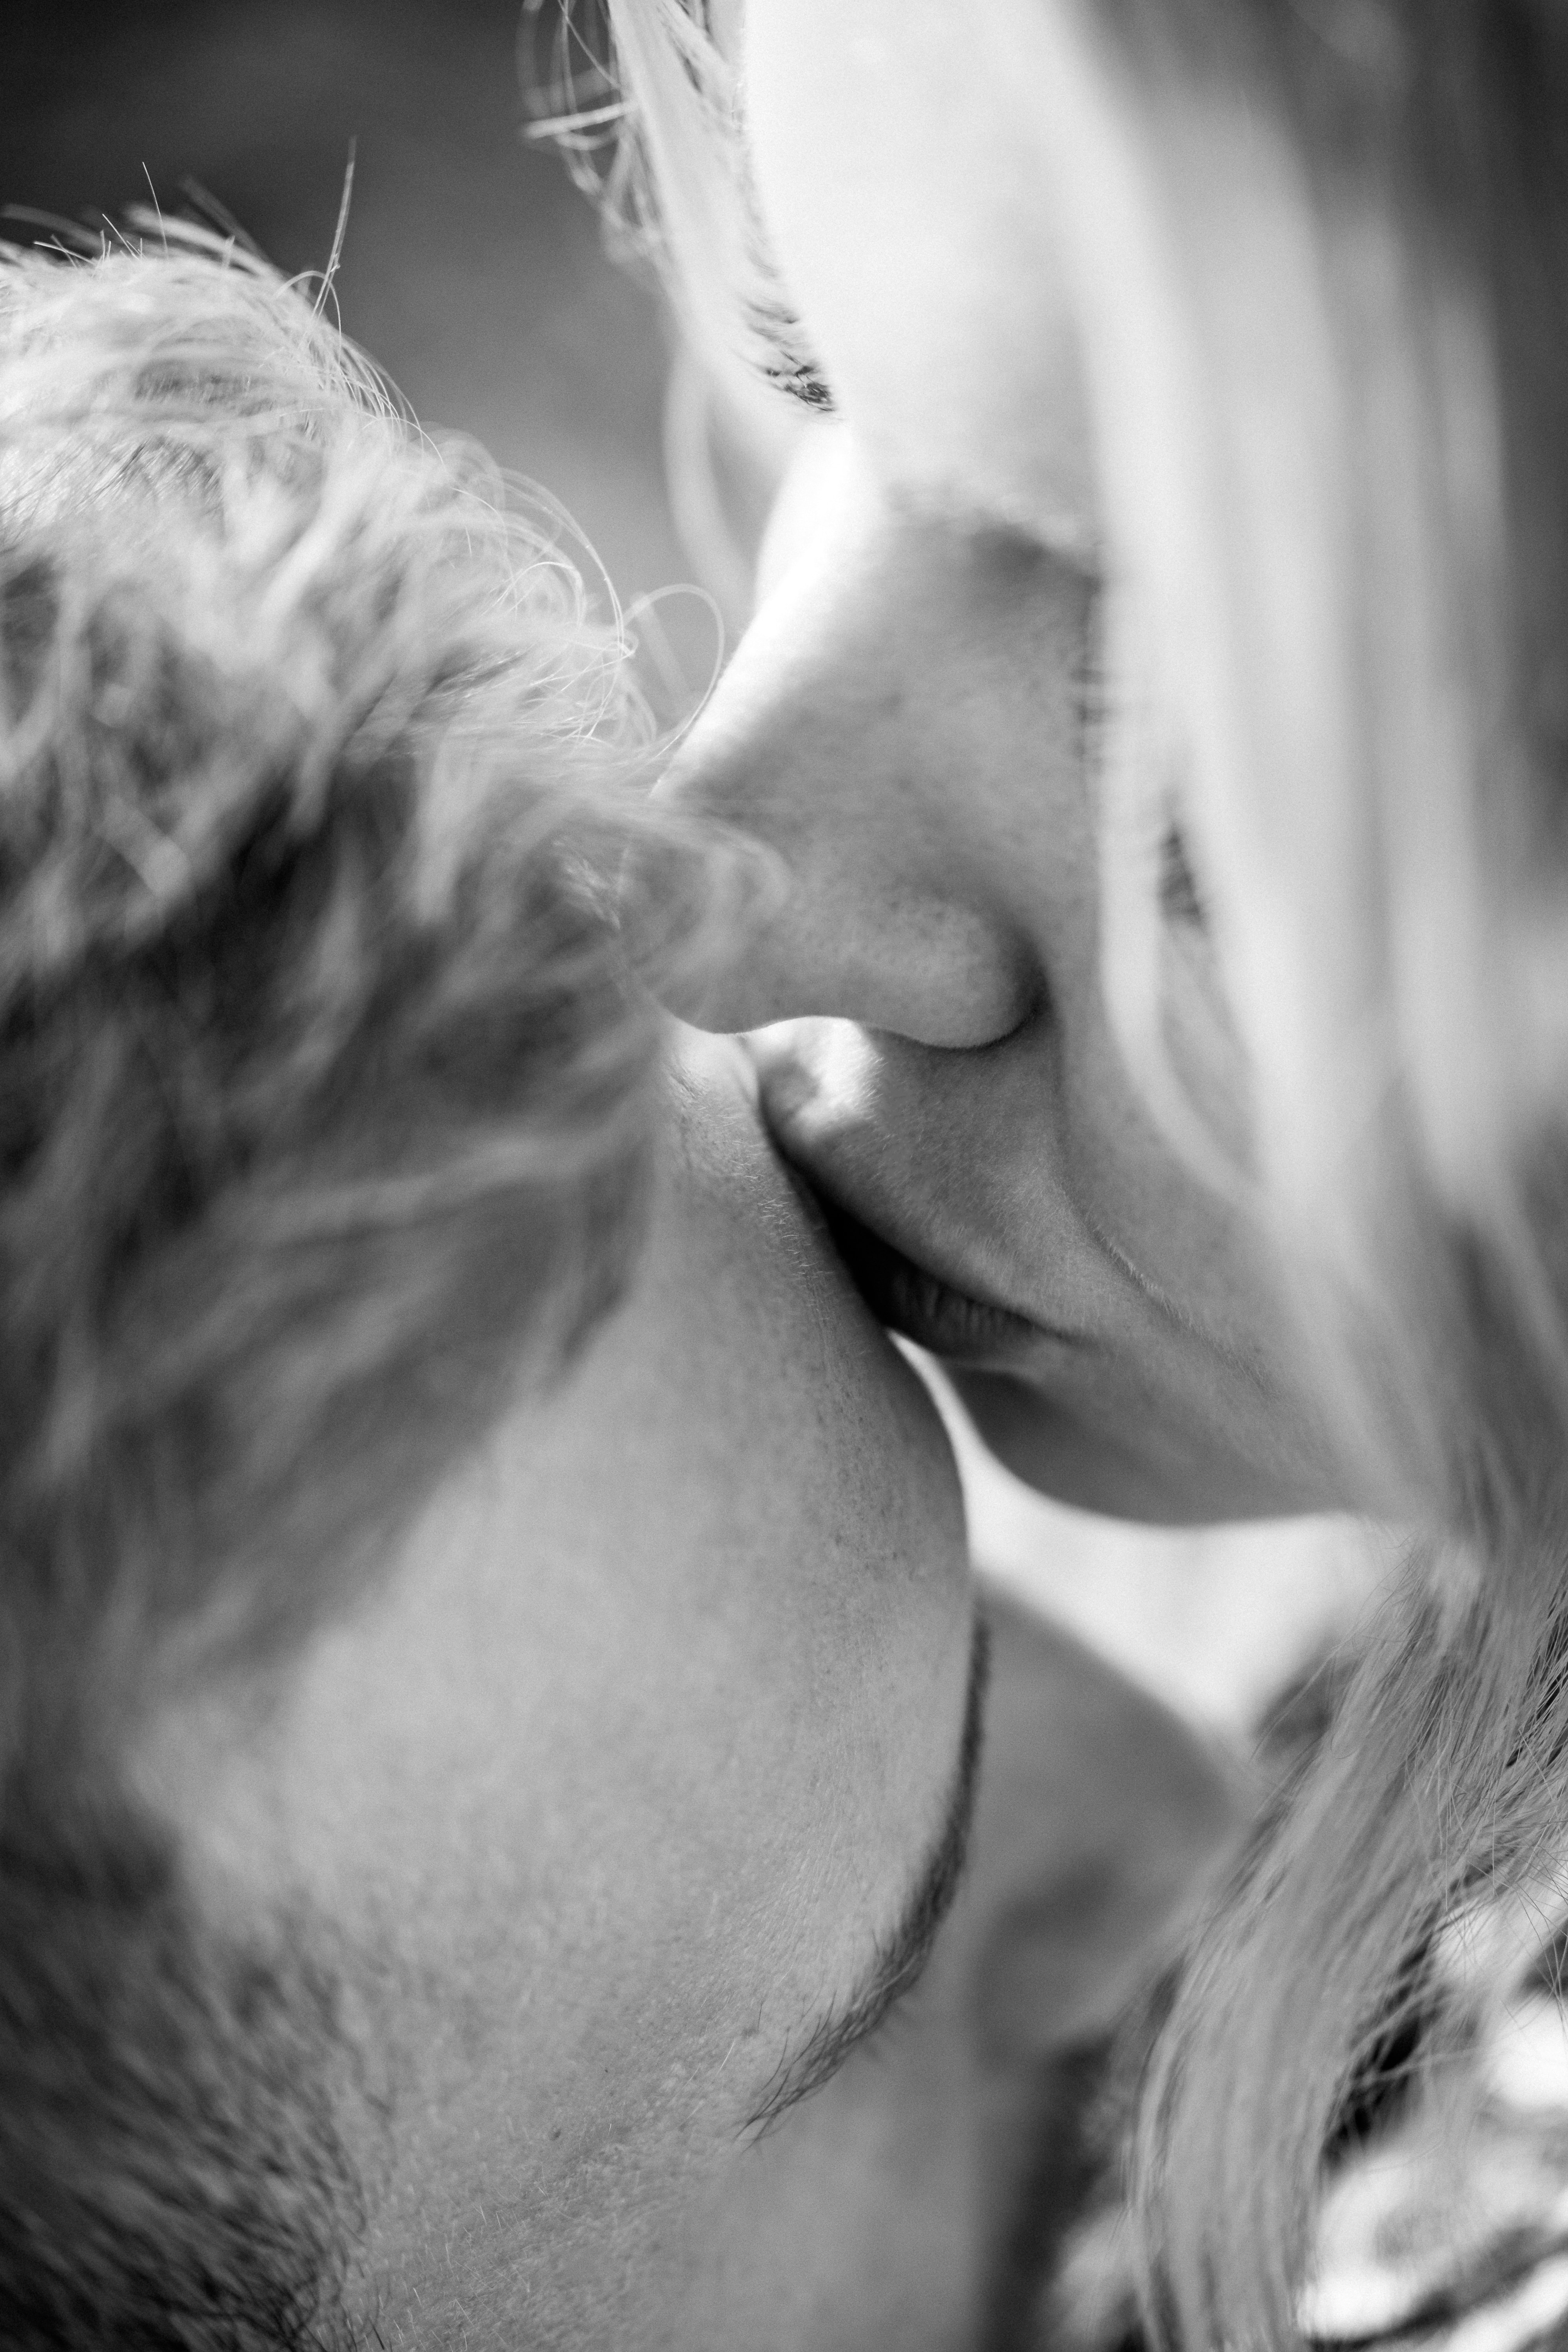 Affectionate woman kissing her partner on his forehead | Source: Unsplash